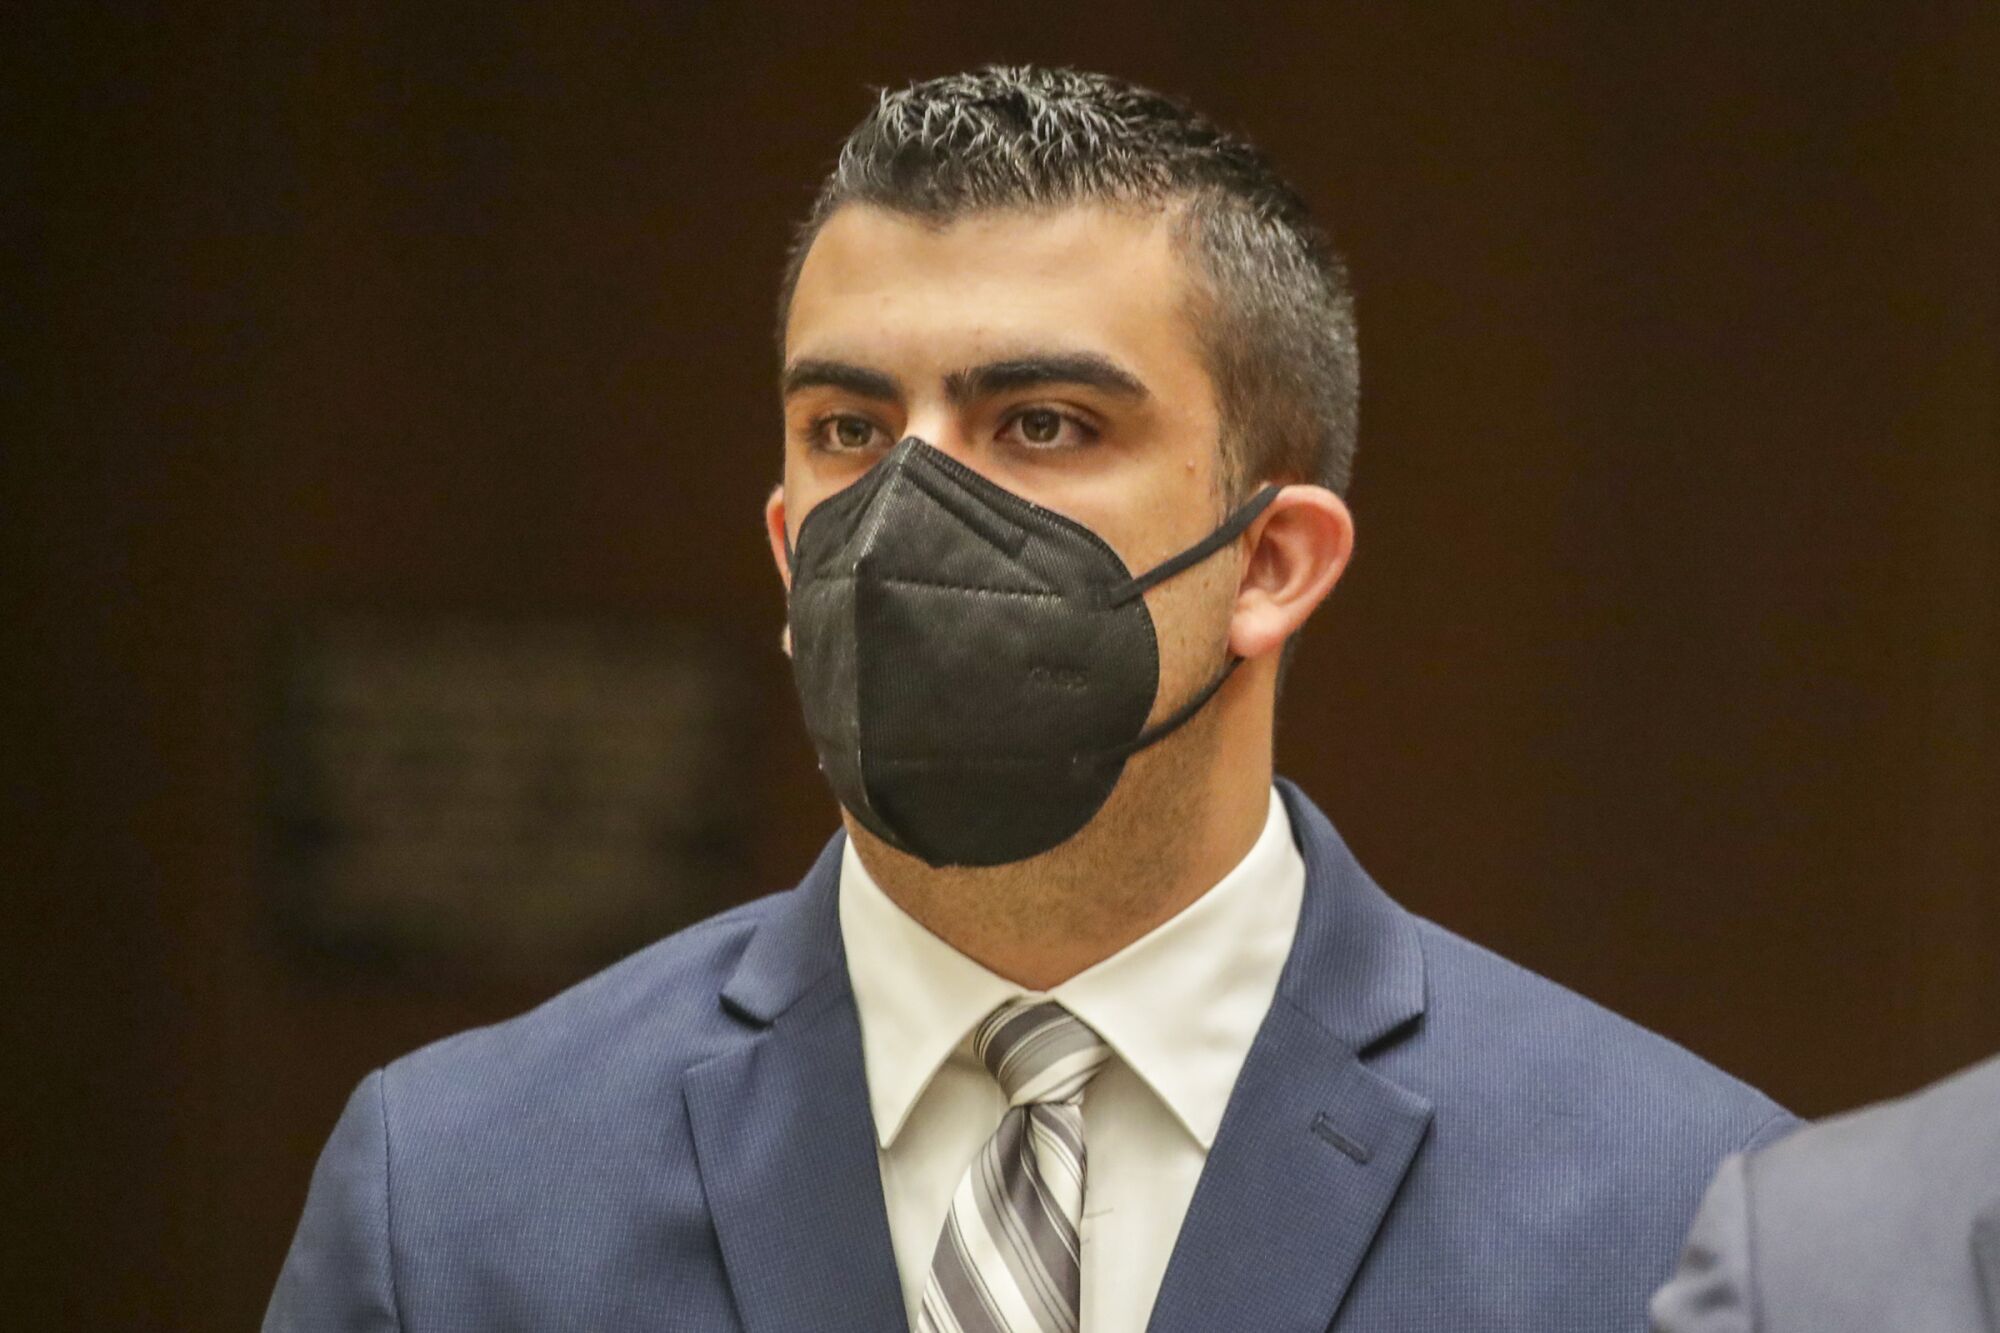 Daniel Nogueira wears a mask and a suit